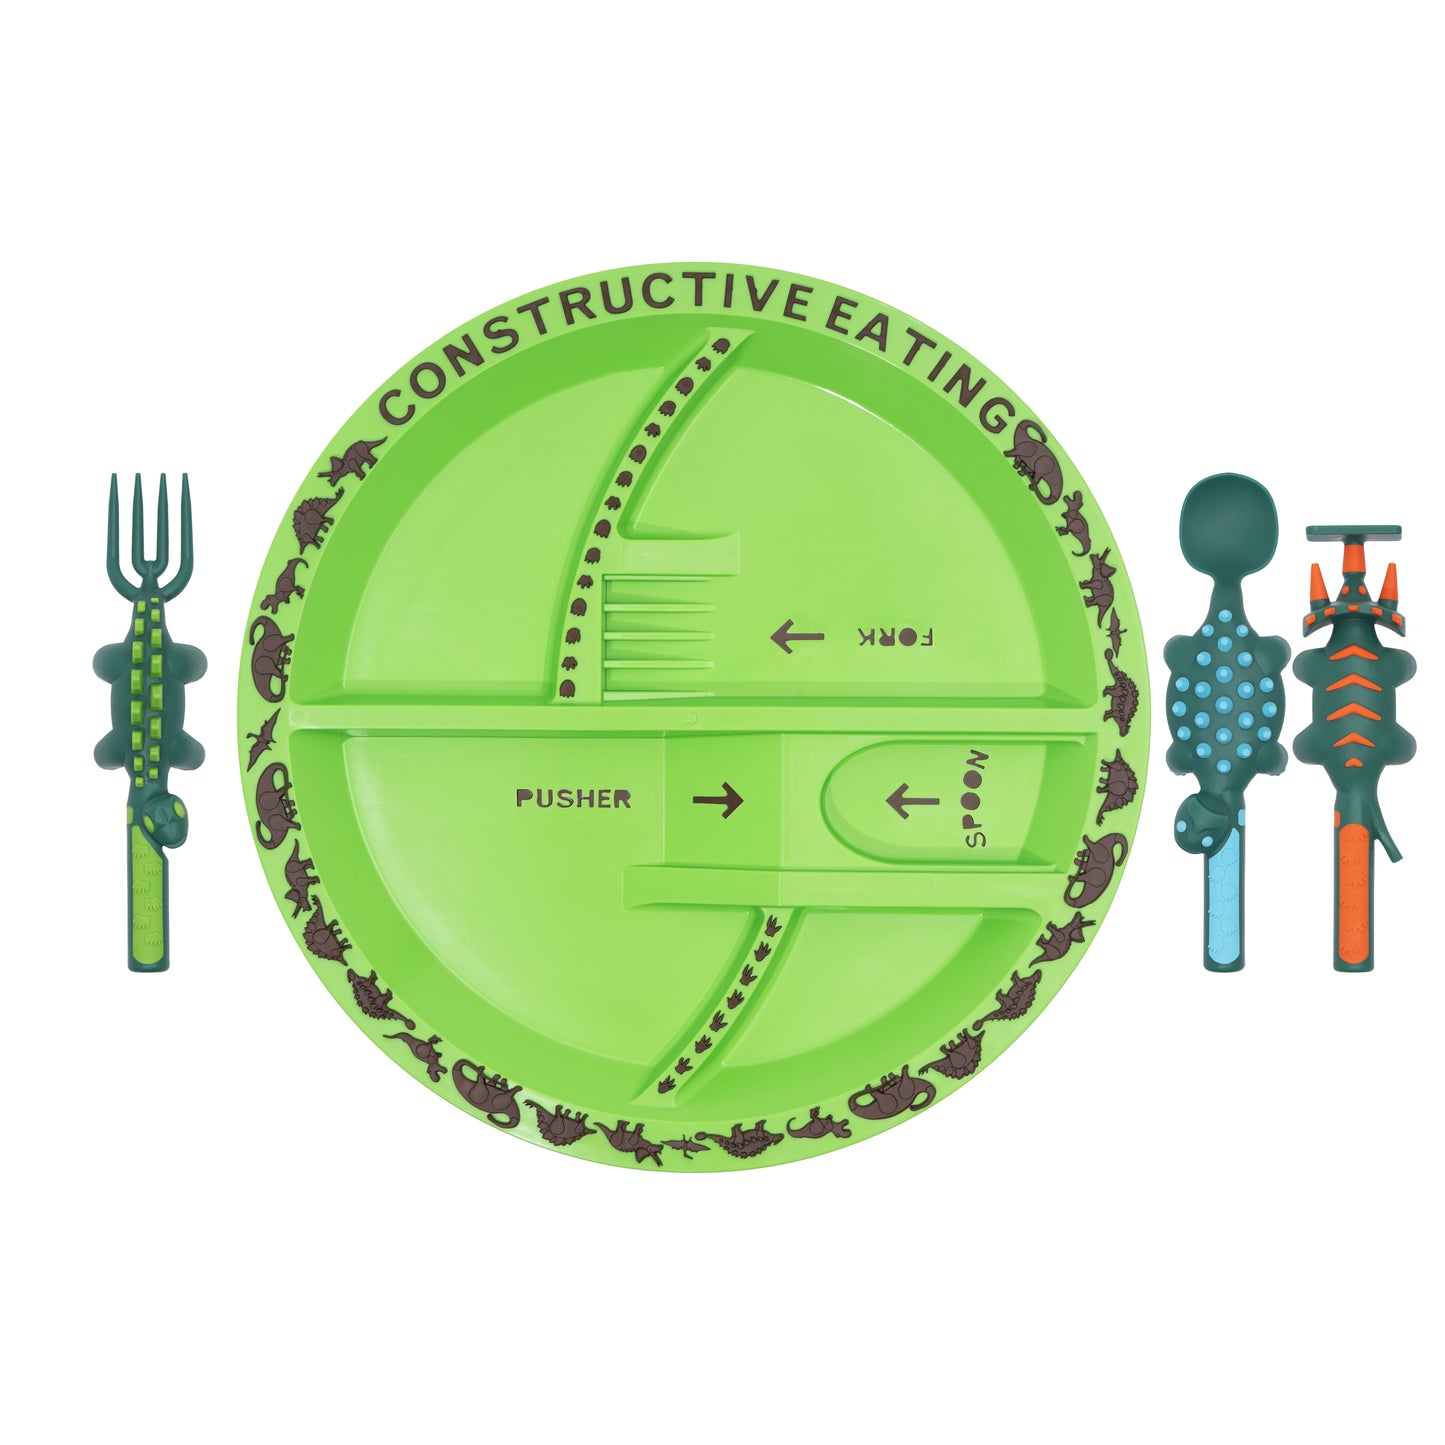 Made in USA fork, spoon, plate, and food pusher - Dinosaur themed - Constructive Eating